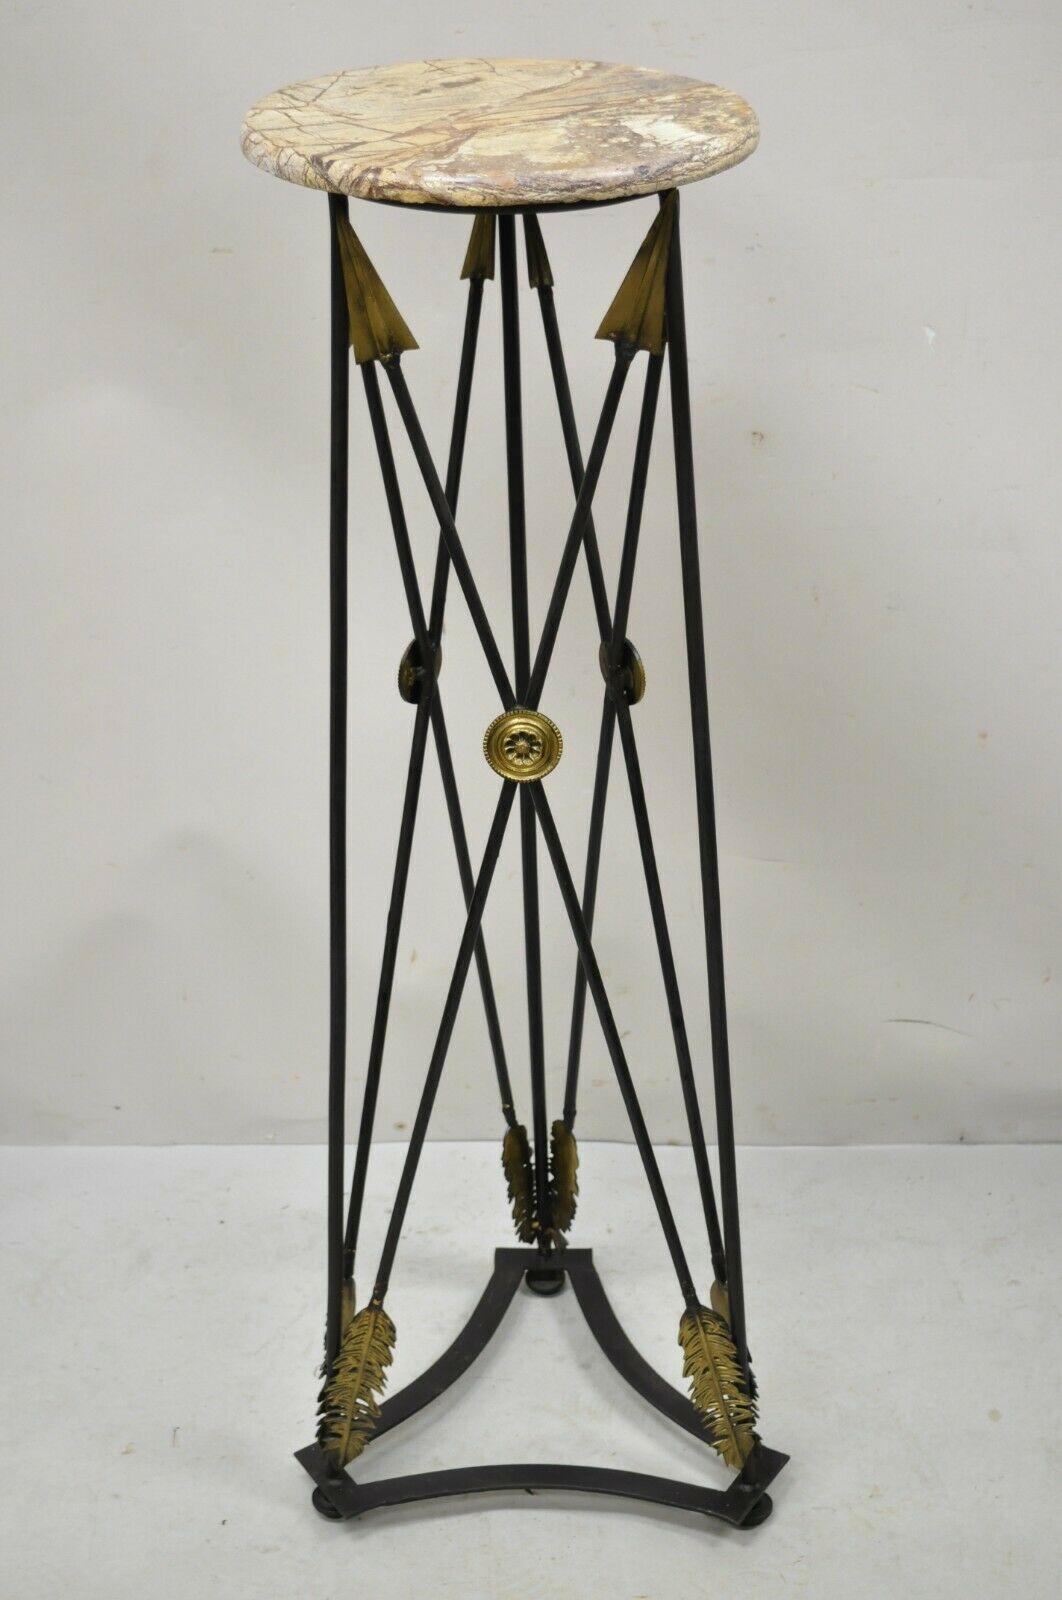 Neoclassical style pink marble top X-form arrow pedestal plant stand table. Item features a round marble top, iron arrow form tripod pedestal base, very nice item, great style and form, possibly by Maitland Smith. Circa Late 20th Century.